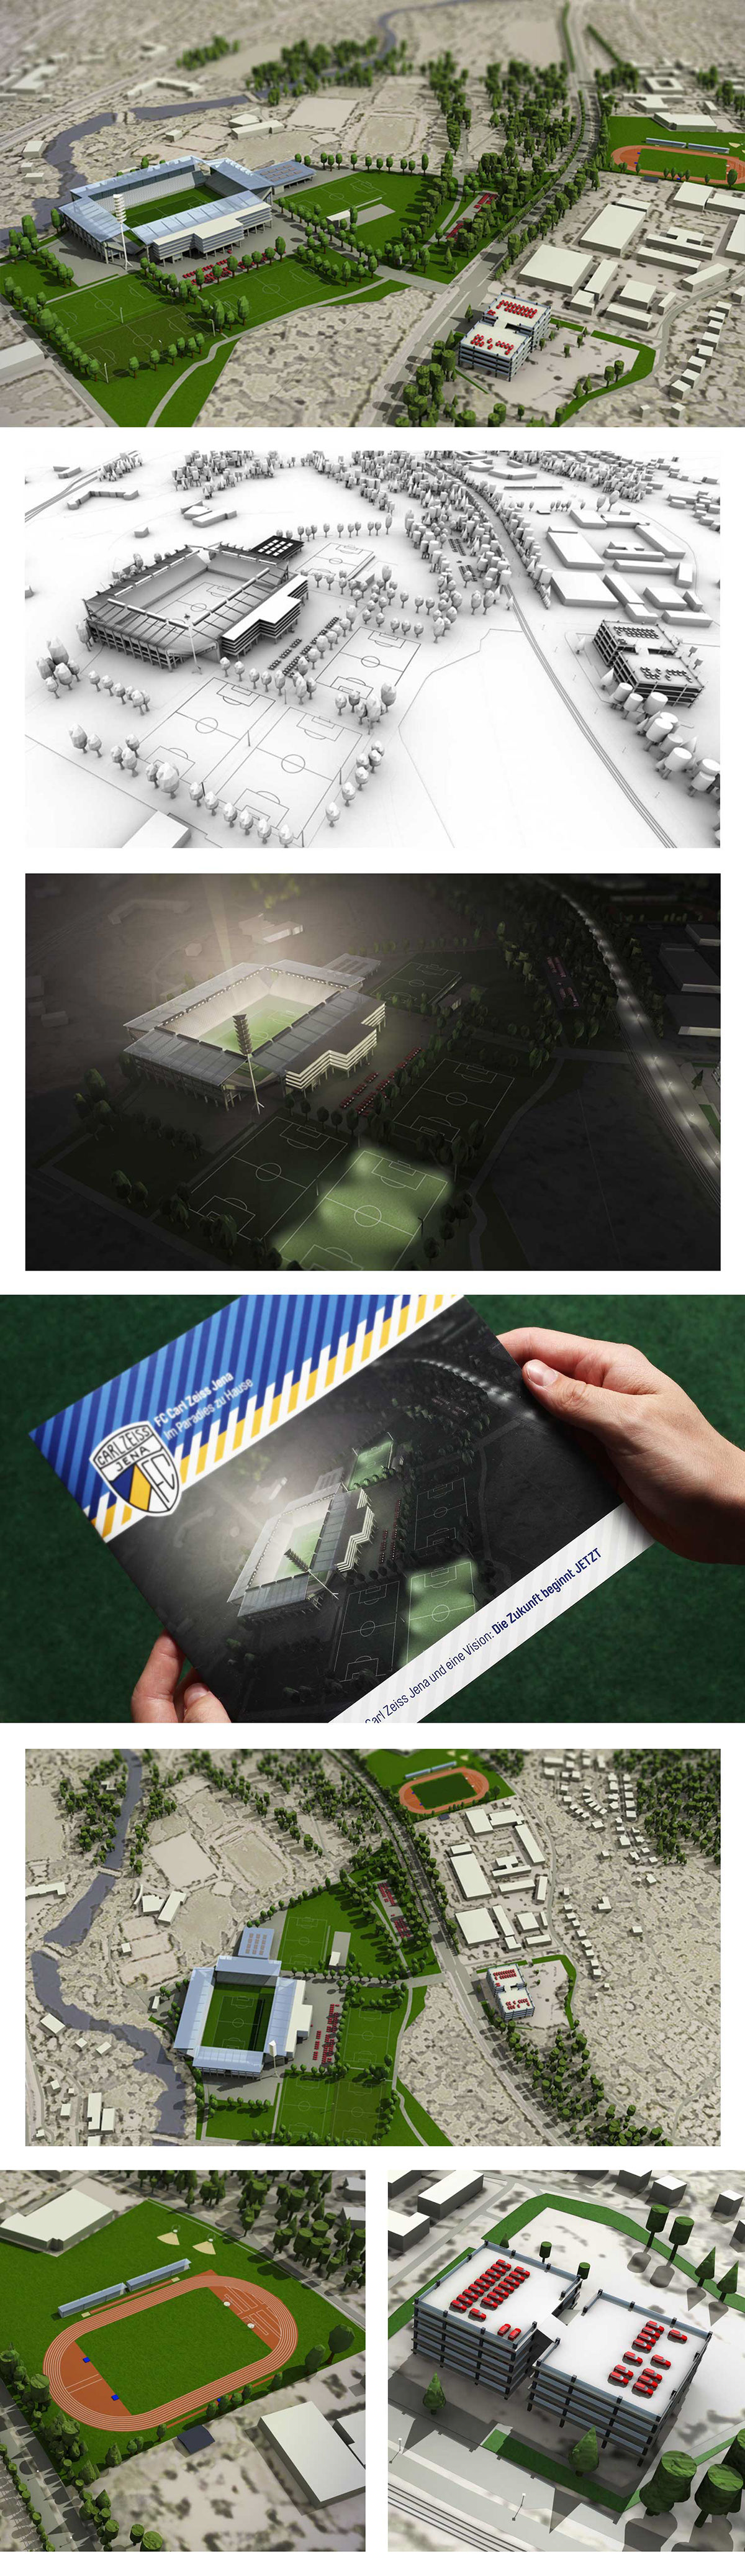 jena stadion 3D Visualisierung rendering 3d modell